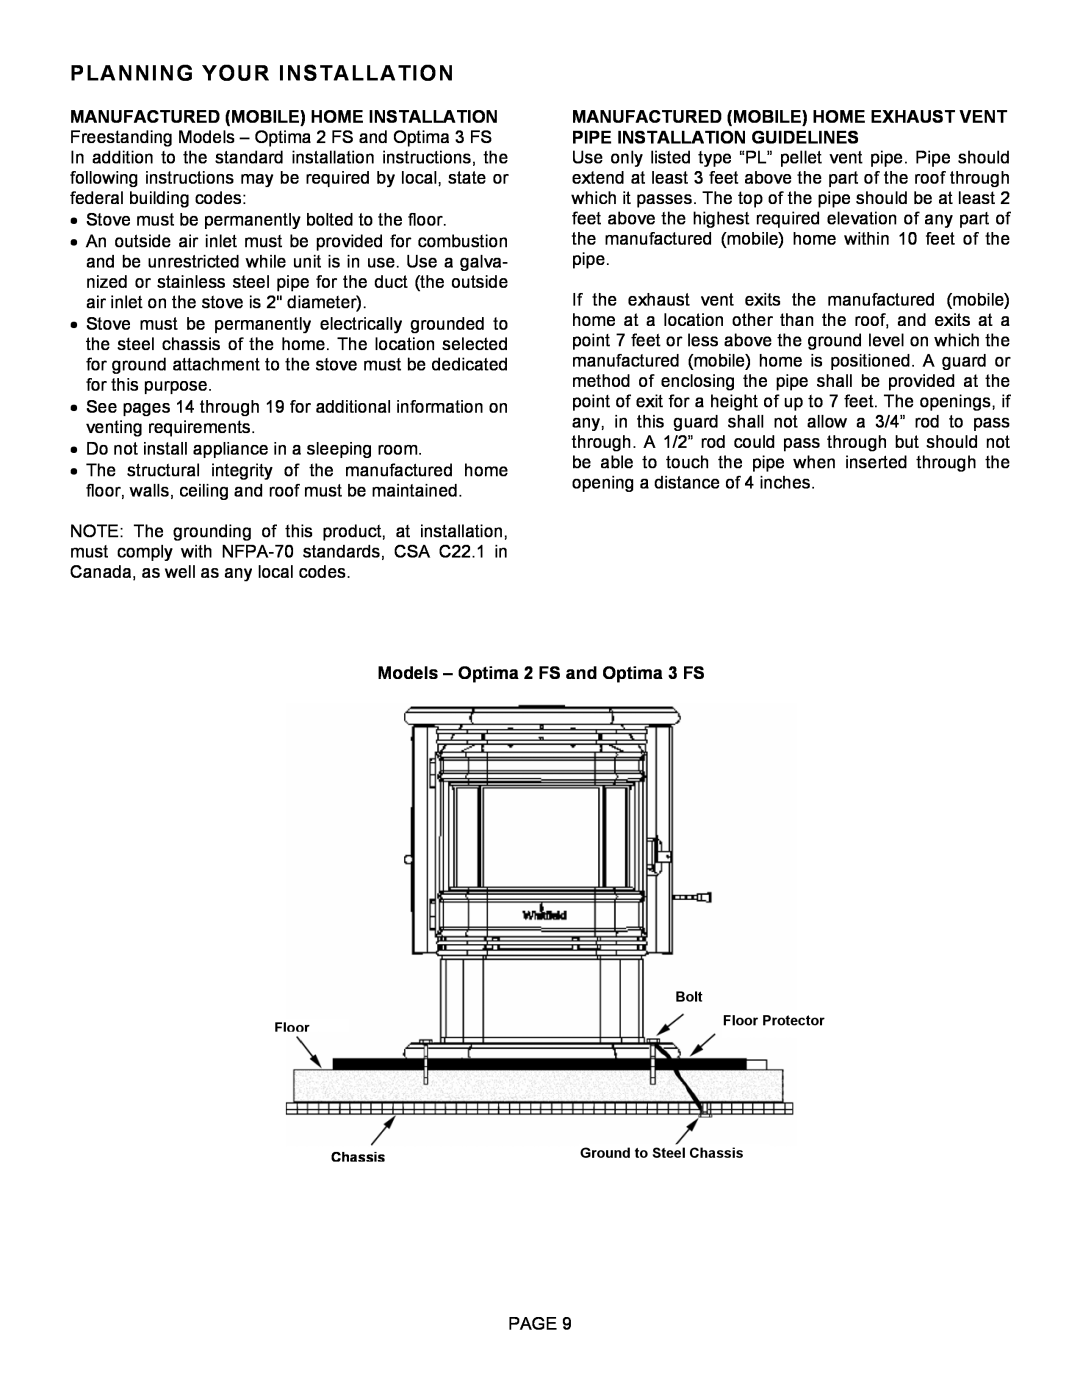 Lenoxx Electronics operation manual Models – Optima 2 FS and Optima 3 FS, Planning Your Installation 